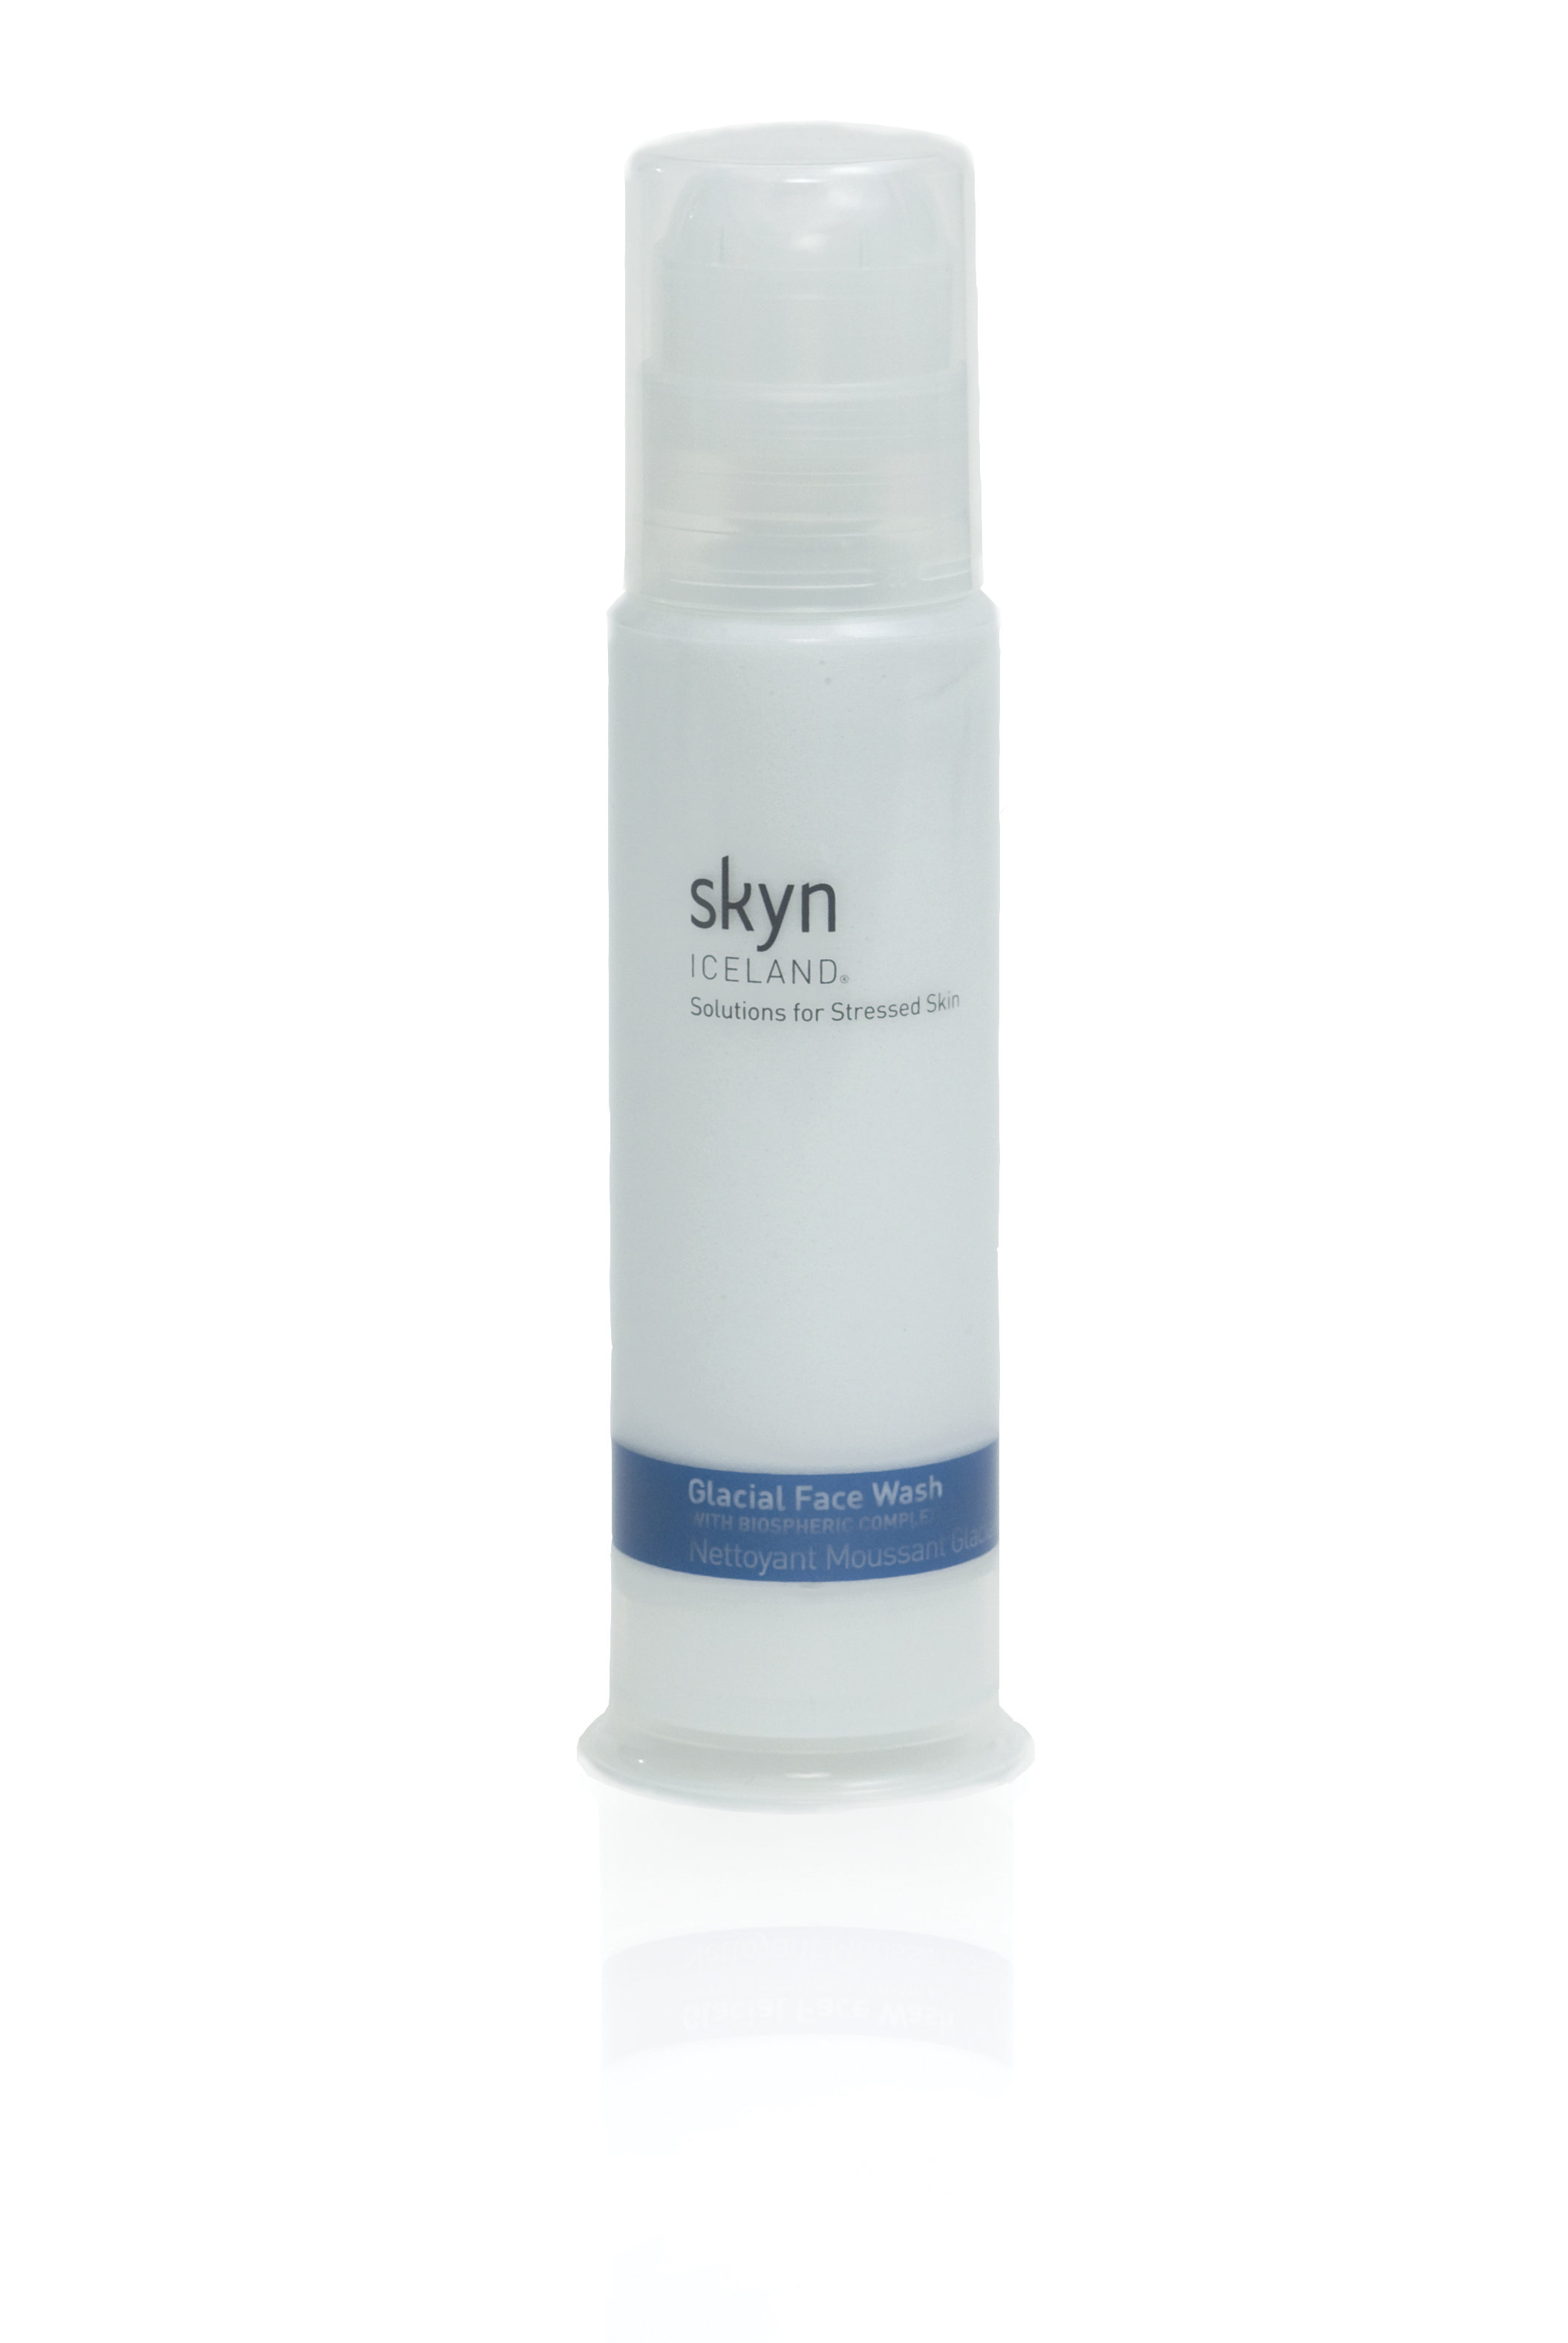 Skyn Iceland Glacial Face Wash with Biospheric Complex